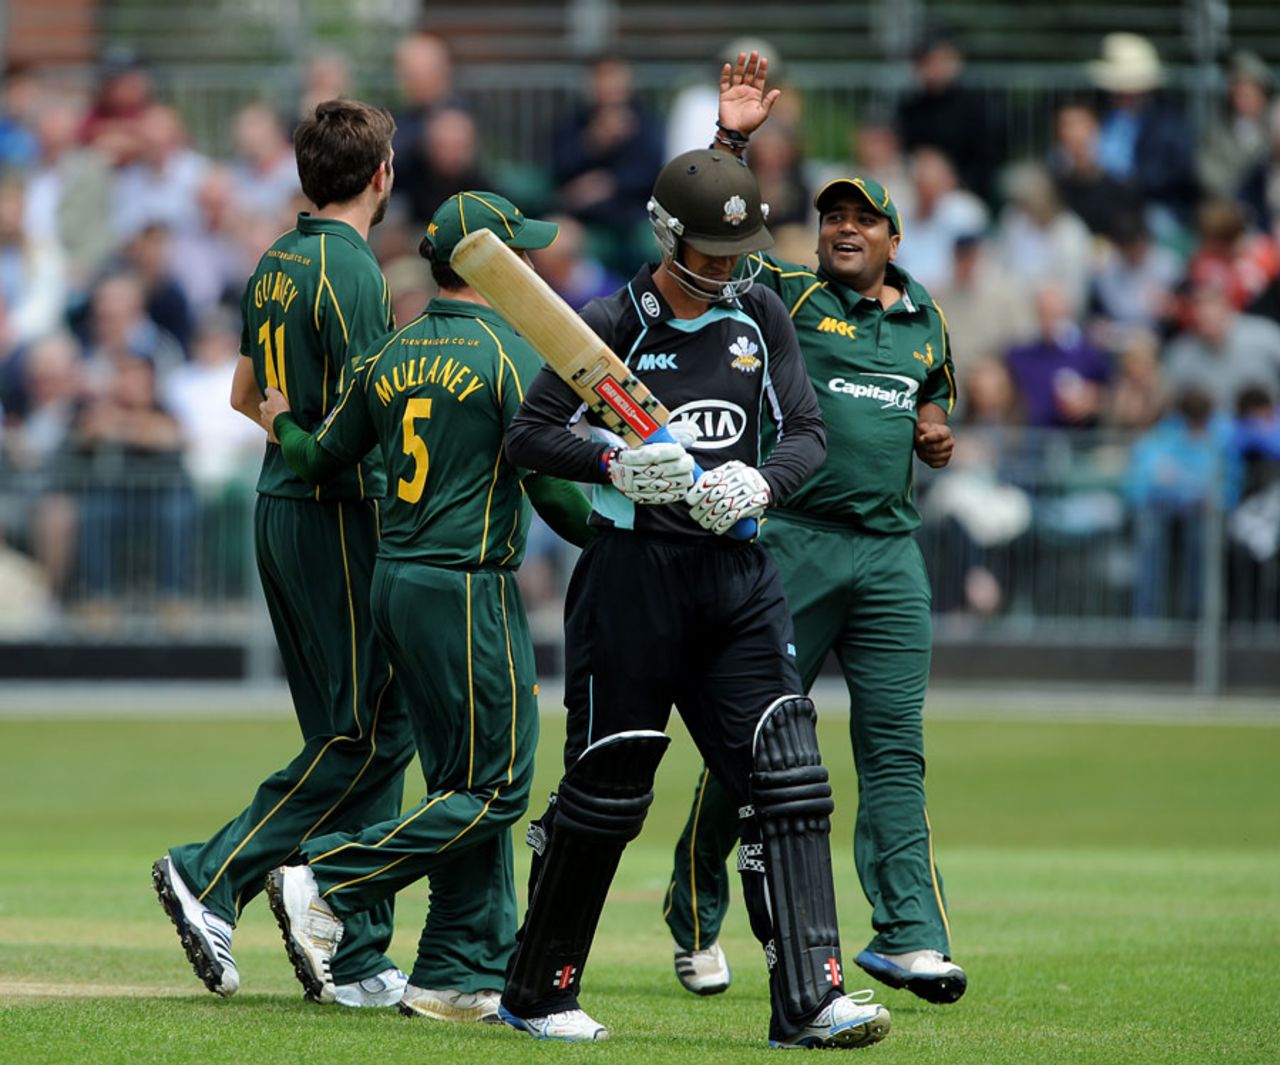 Nottinghamshire celebrate another wicket during Surrey's collapse, Surrey v Nottinghamshire, CB40, Guildford, July 15, 2012